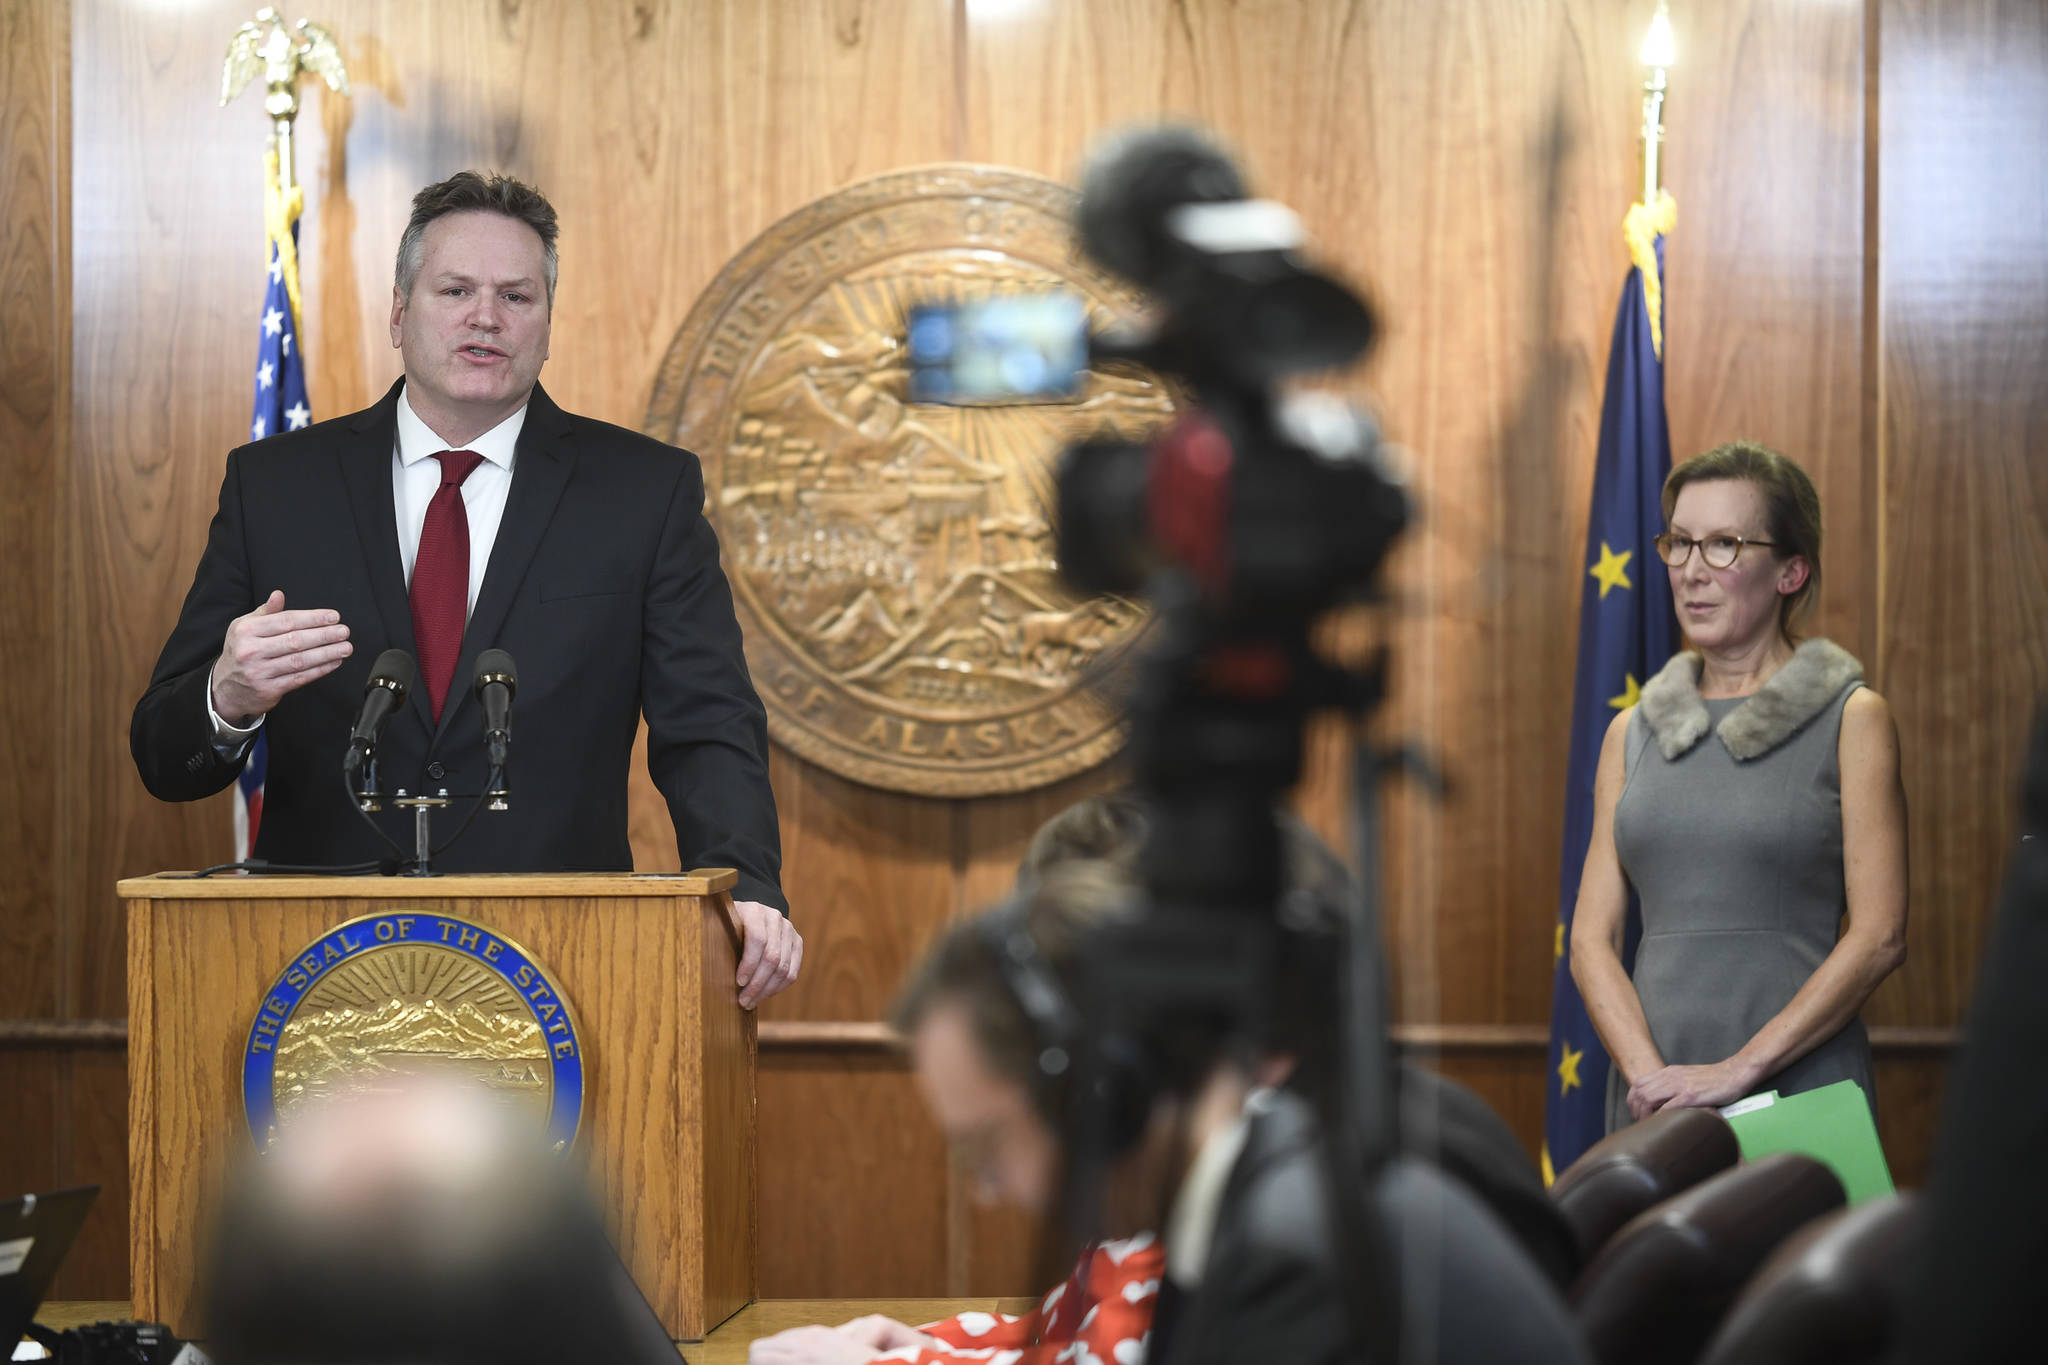 Office of Budget and Management Director Donna Arduin, right, listens to Gov. Mike Dunleavy announce his state budget during a press conference on Wednesday, Feb. 13, 2019. (Michael Penn | Juneau Empire)